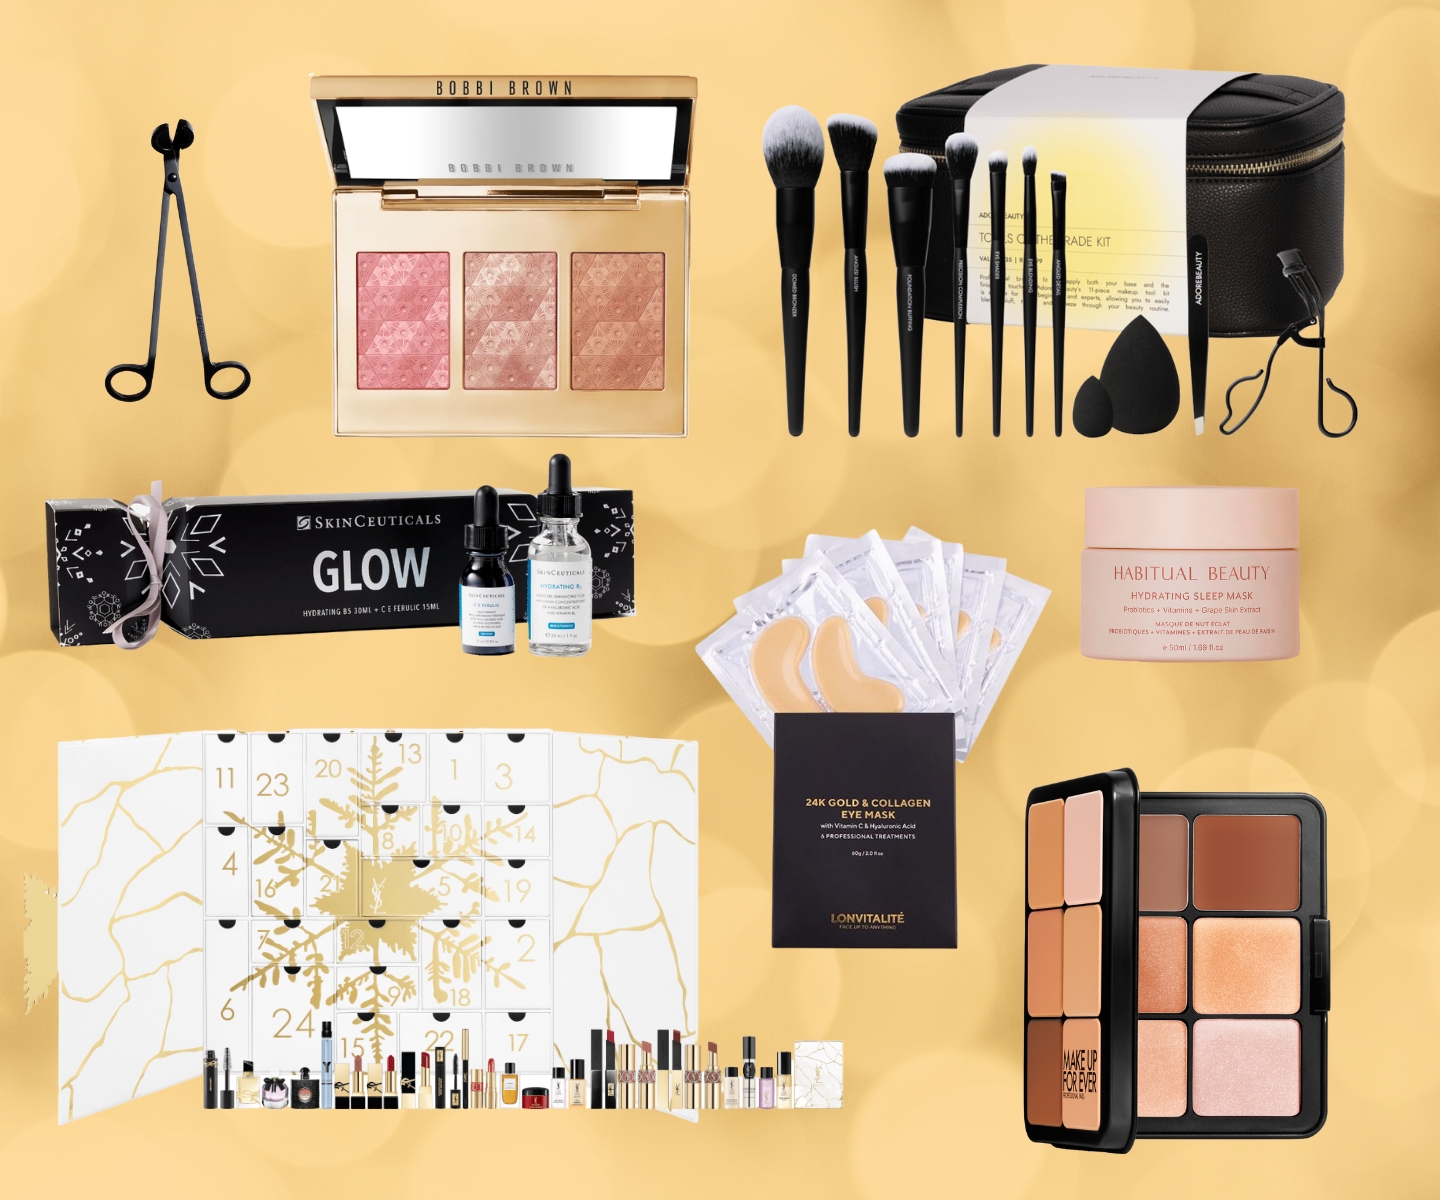 A Beauty Writer Guide to the Perfect Holiday Gifts for Everyone on Your List | Adventskalender für Frauen